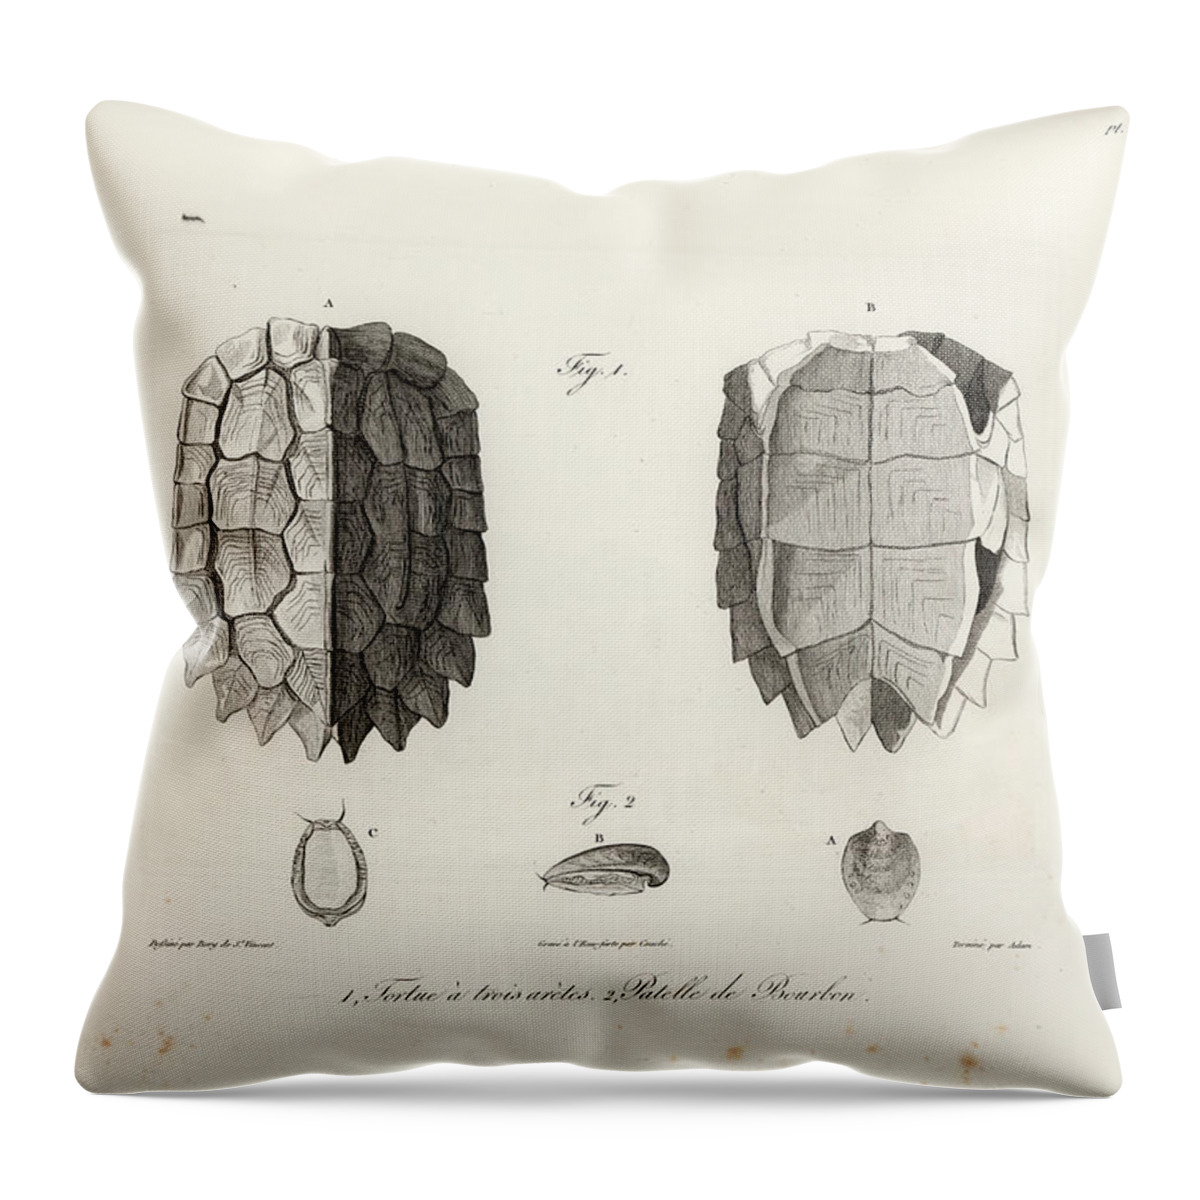 Leaf Turtle Throw Pillow featuring the drawing Black-Breasted Leaf Turtle by J B Bory de Saint Vincent